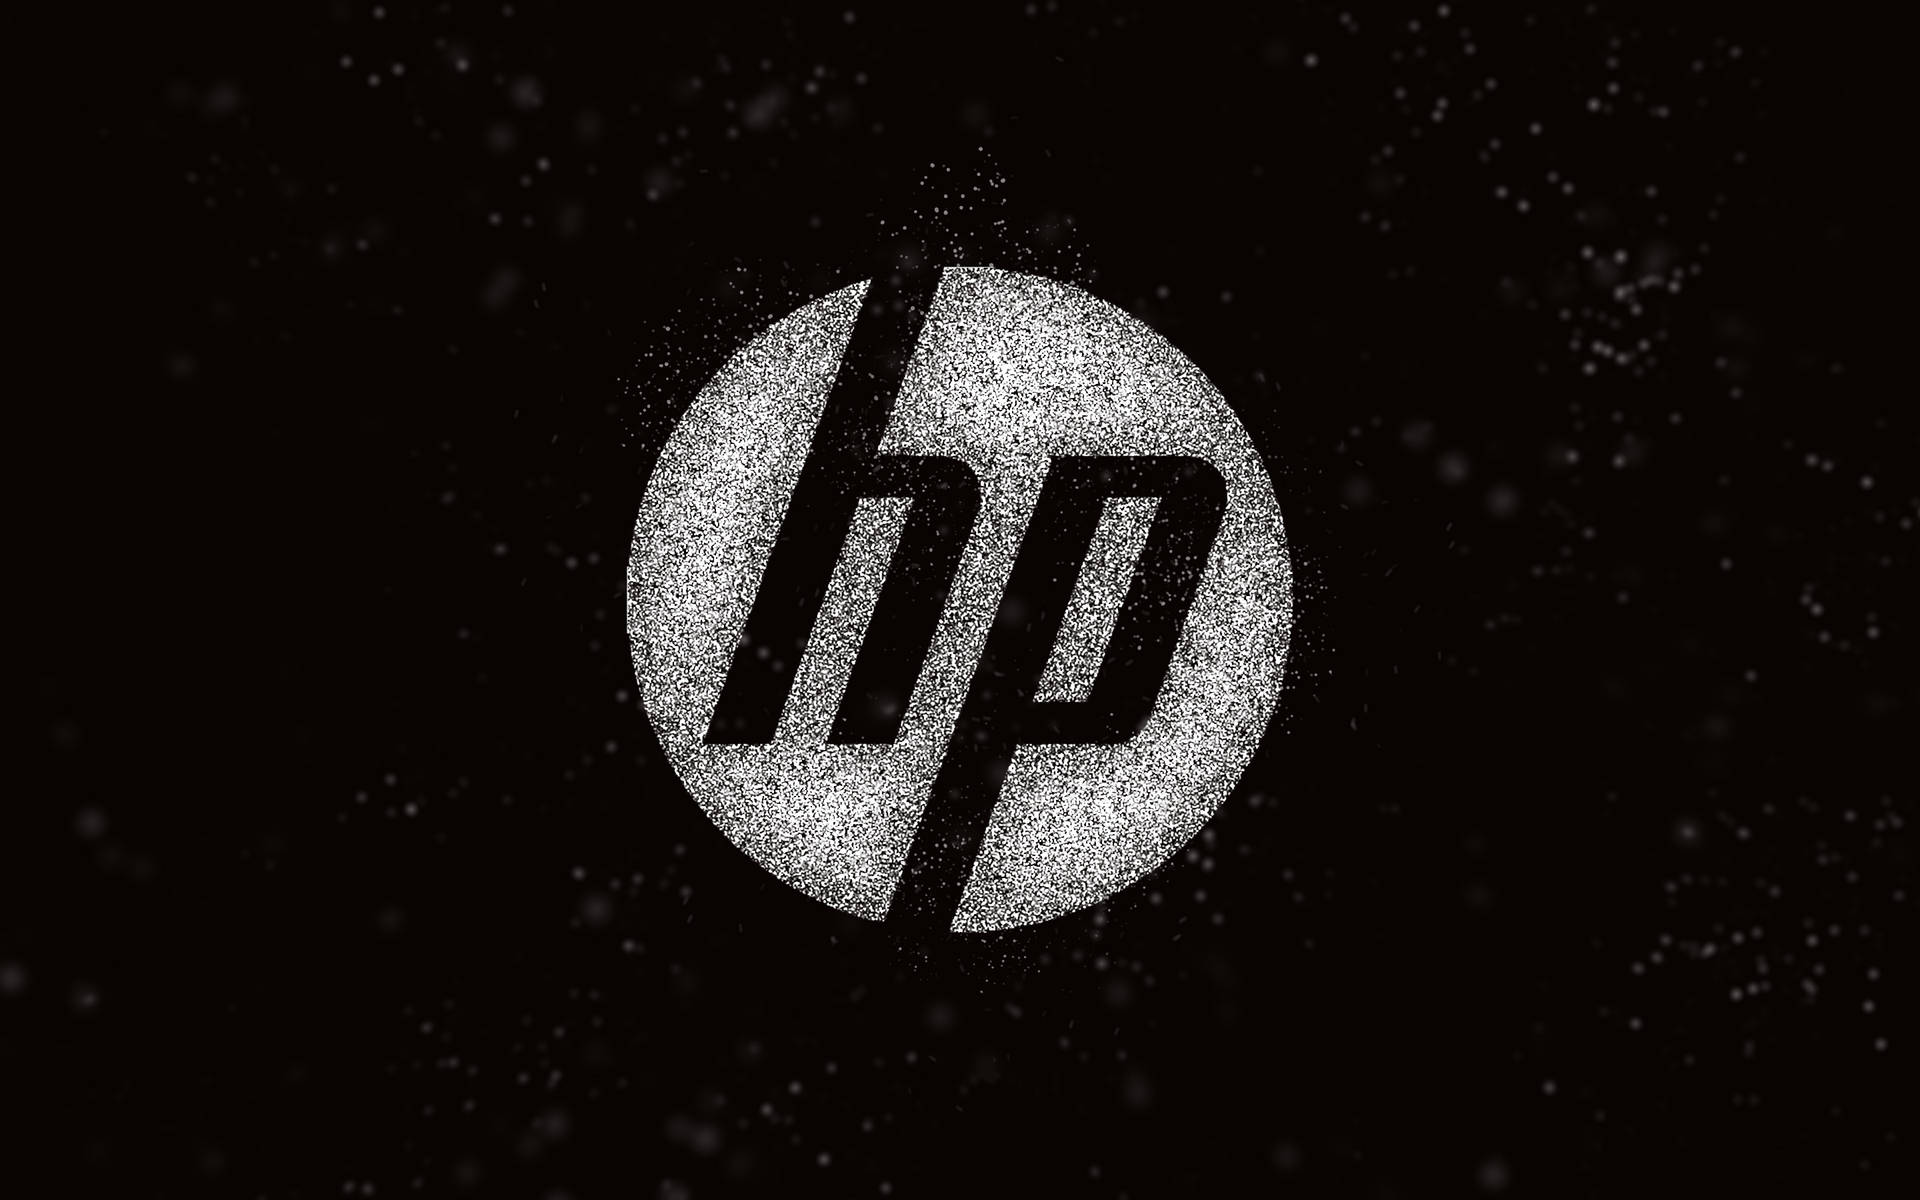 Hp Laptop Logo Crumbling To Dust Background